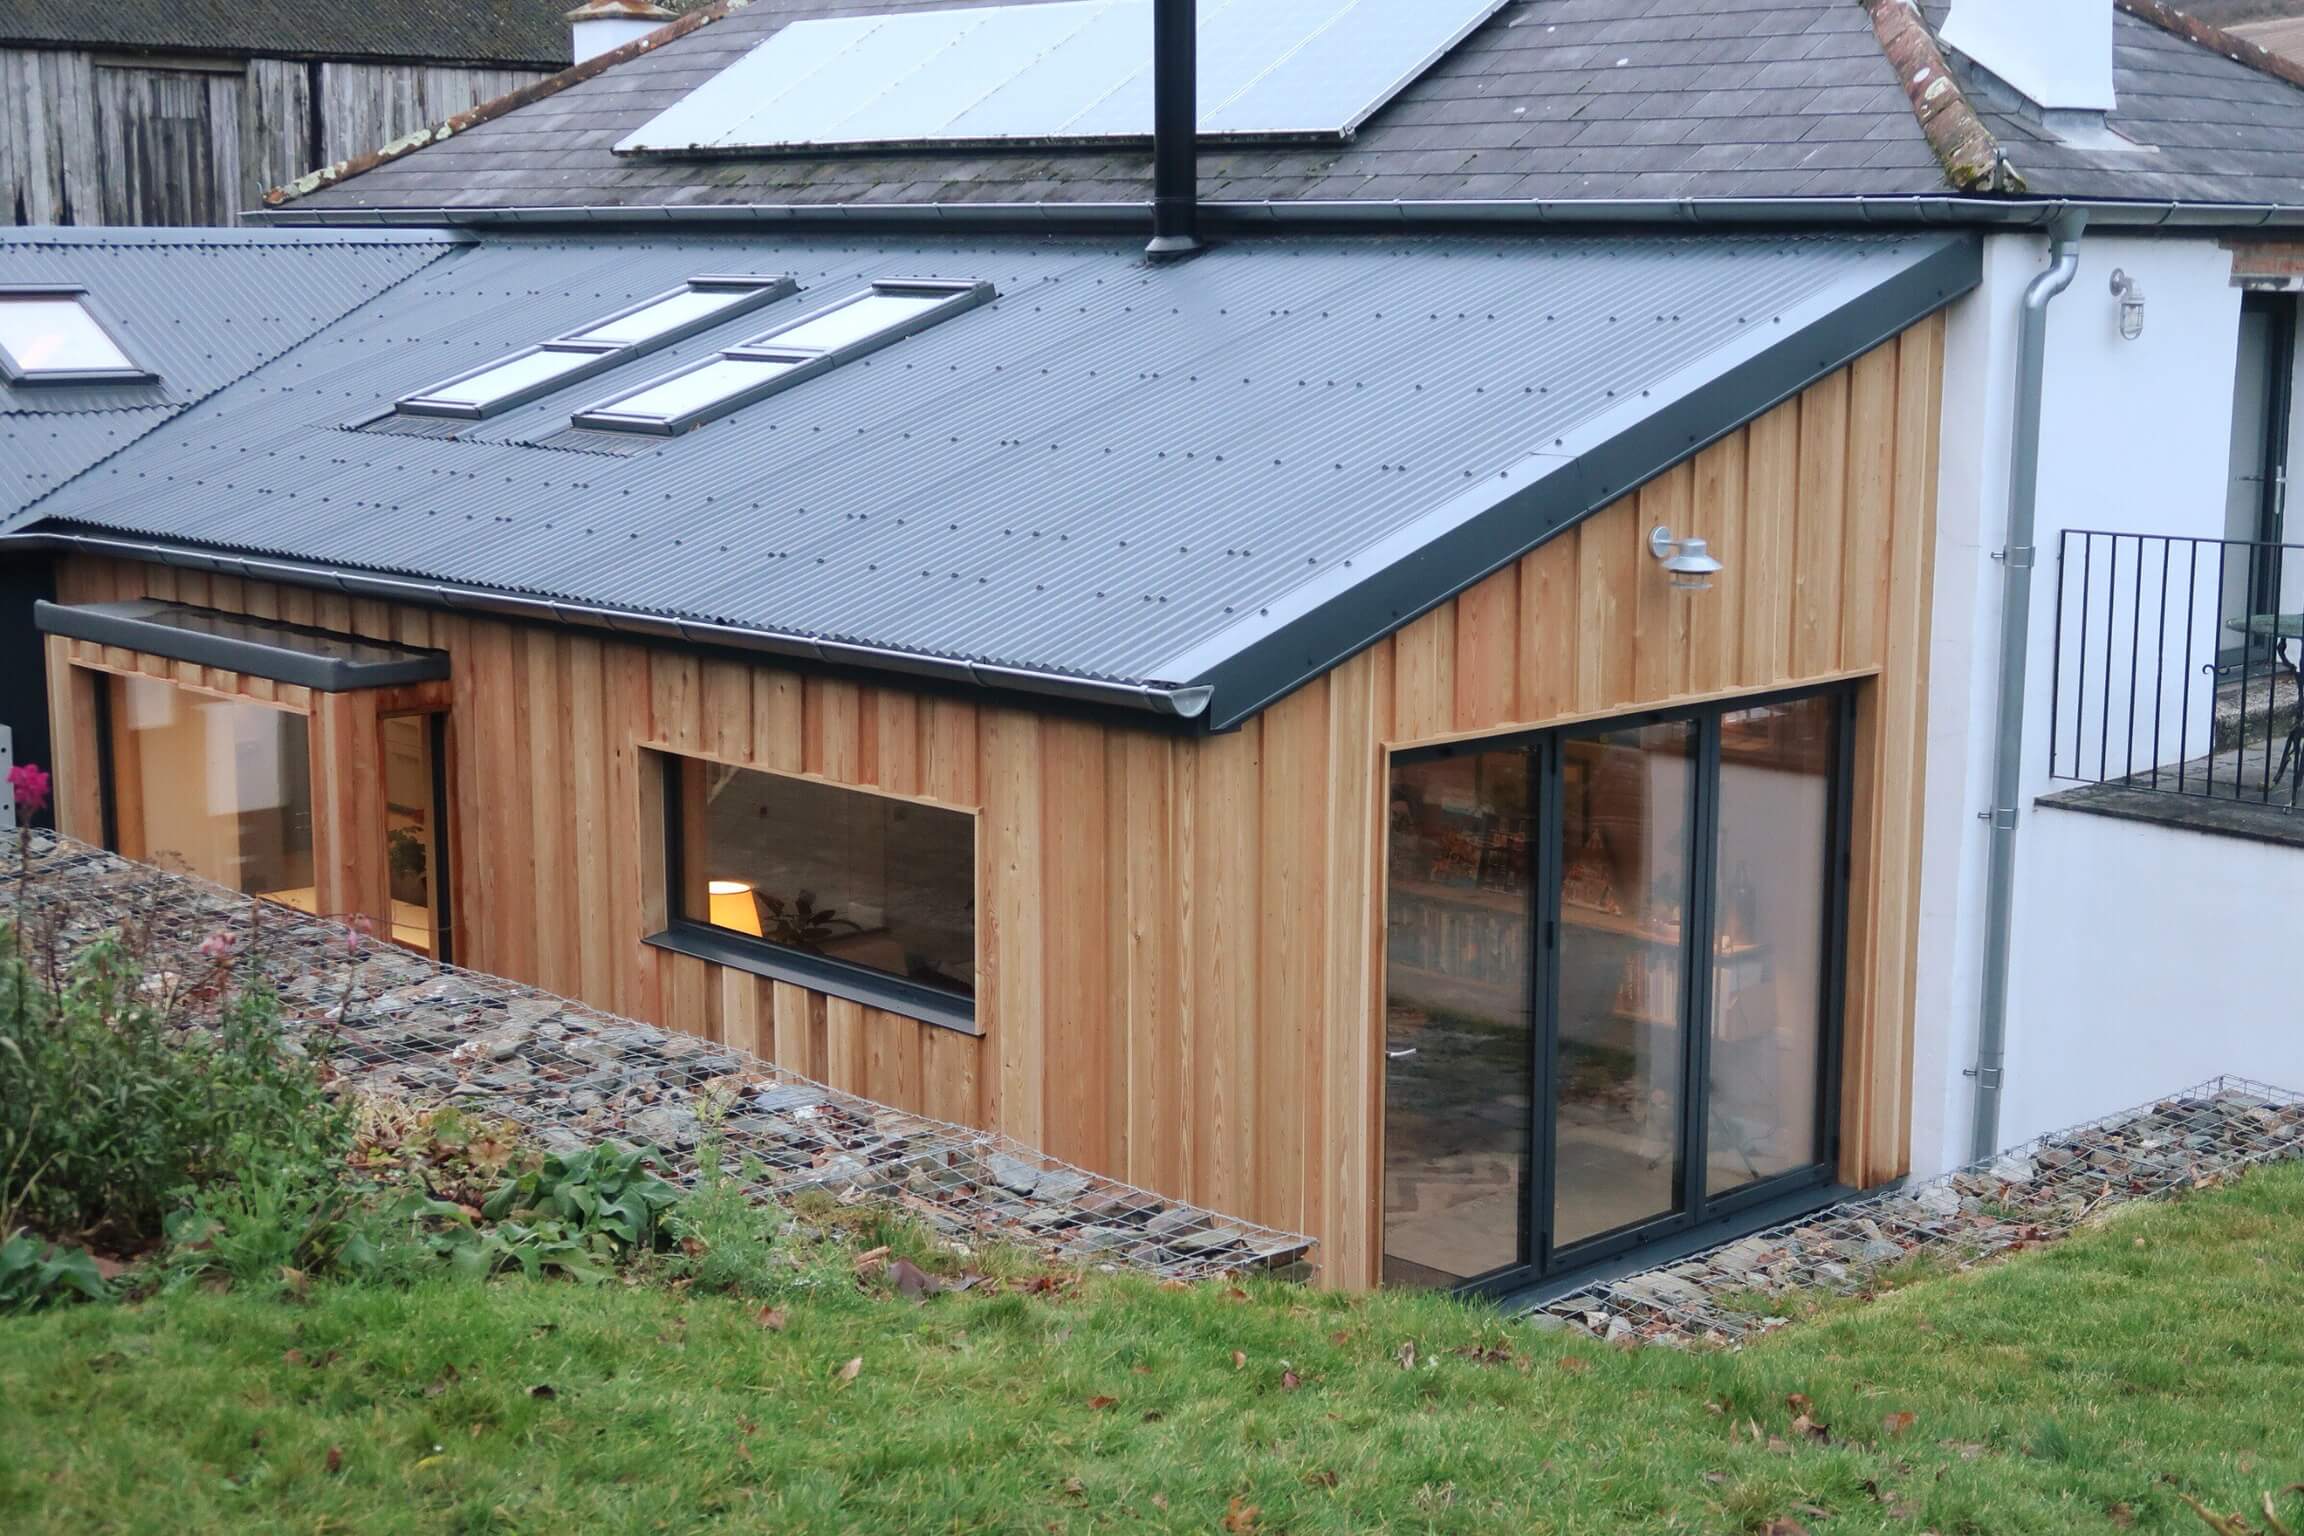 Simply_six_acres on Instagram have added this beautiful extension to their existing home.